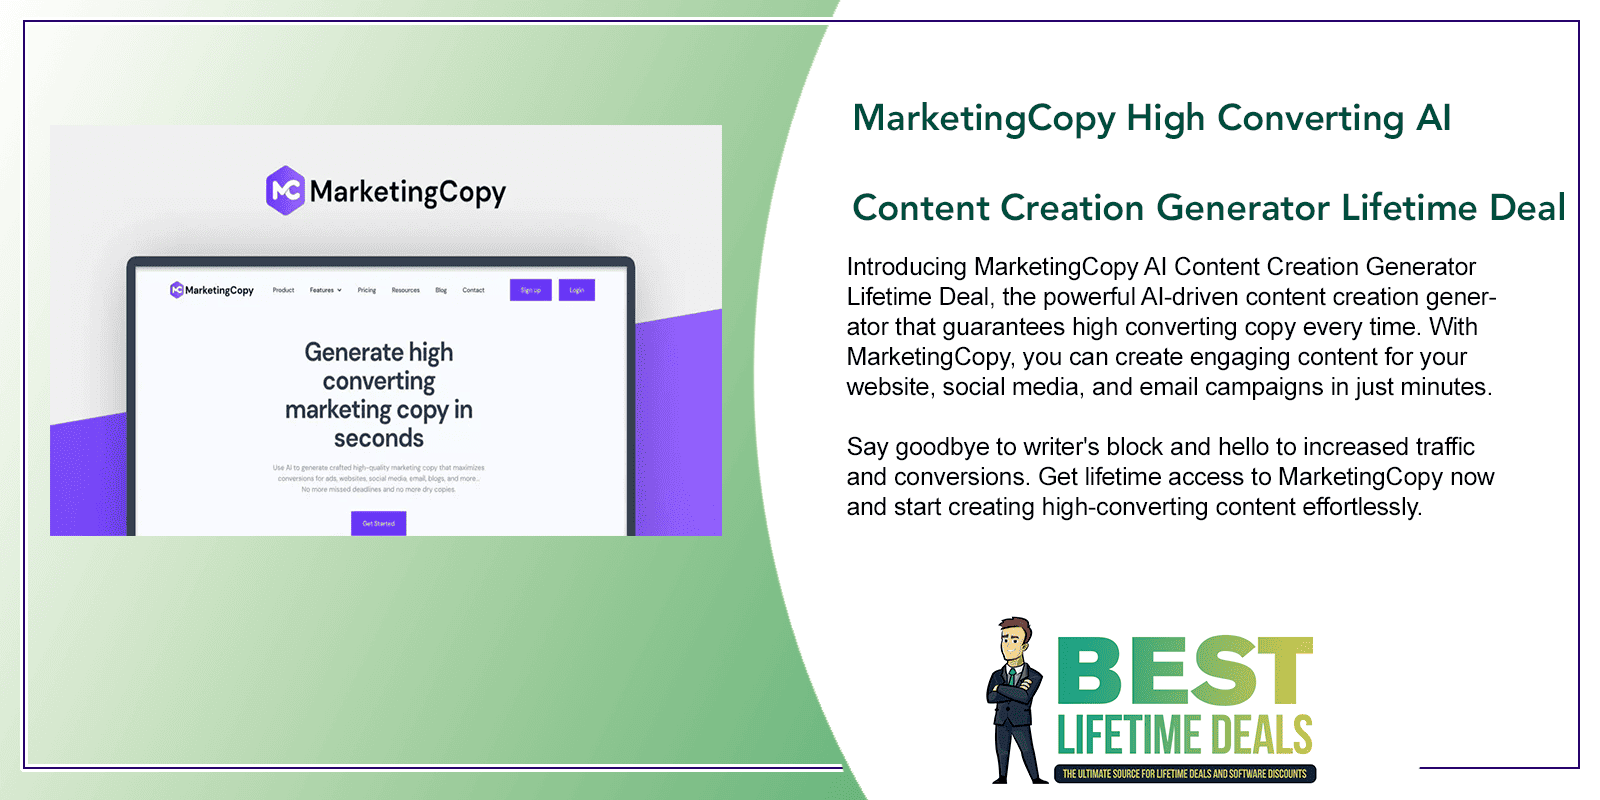 MarketingCopy High Converting AI Content Creation Generator Lifetime Deal Featured Image